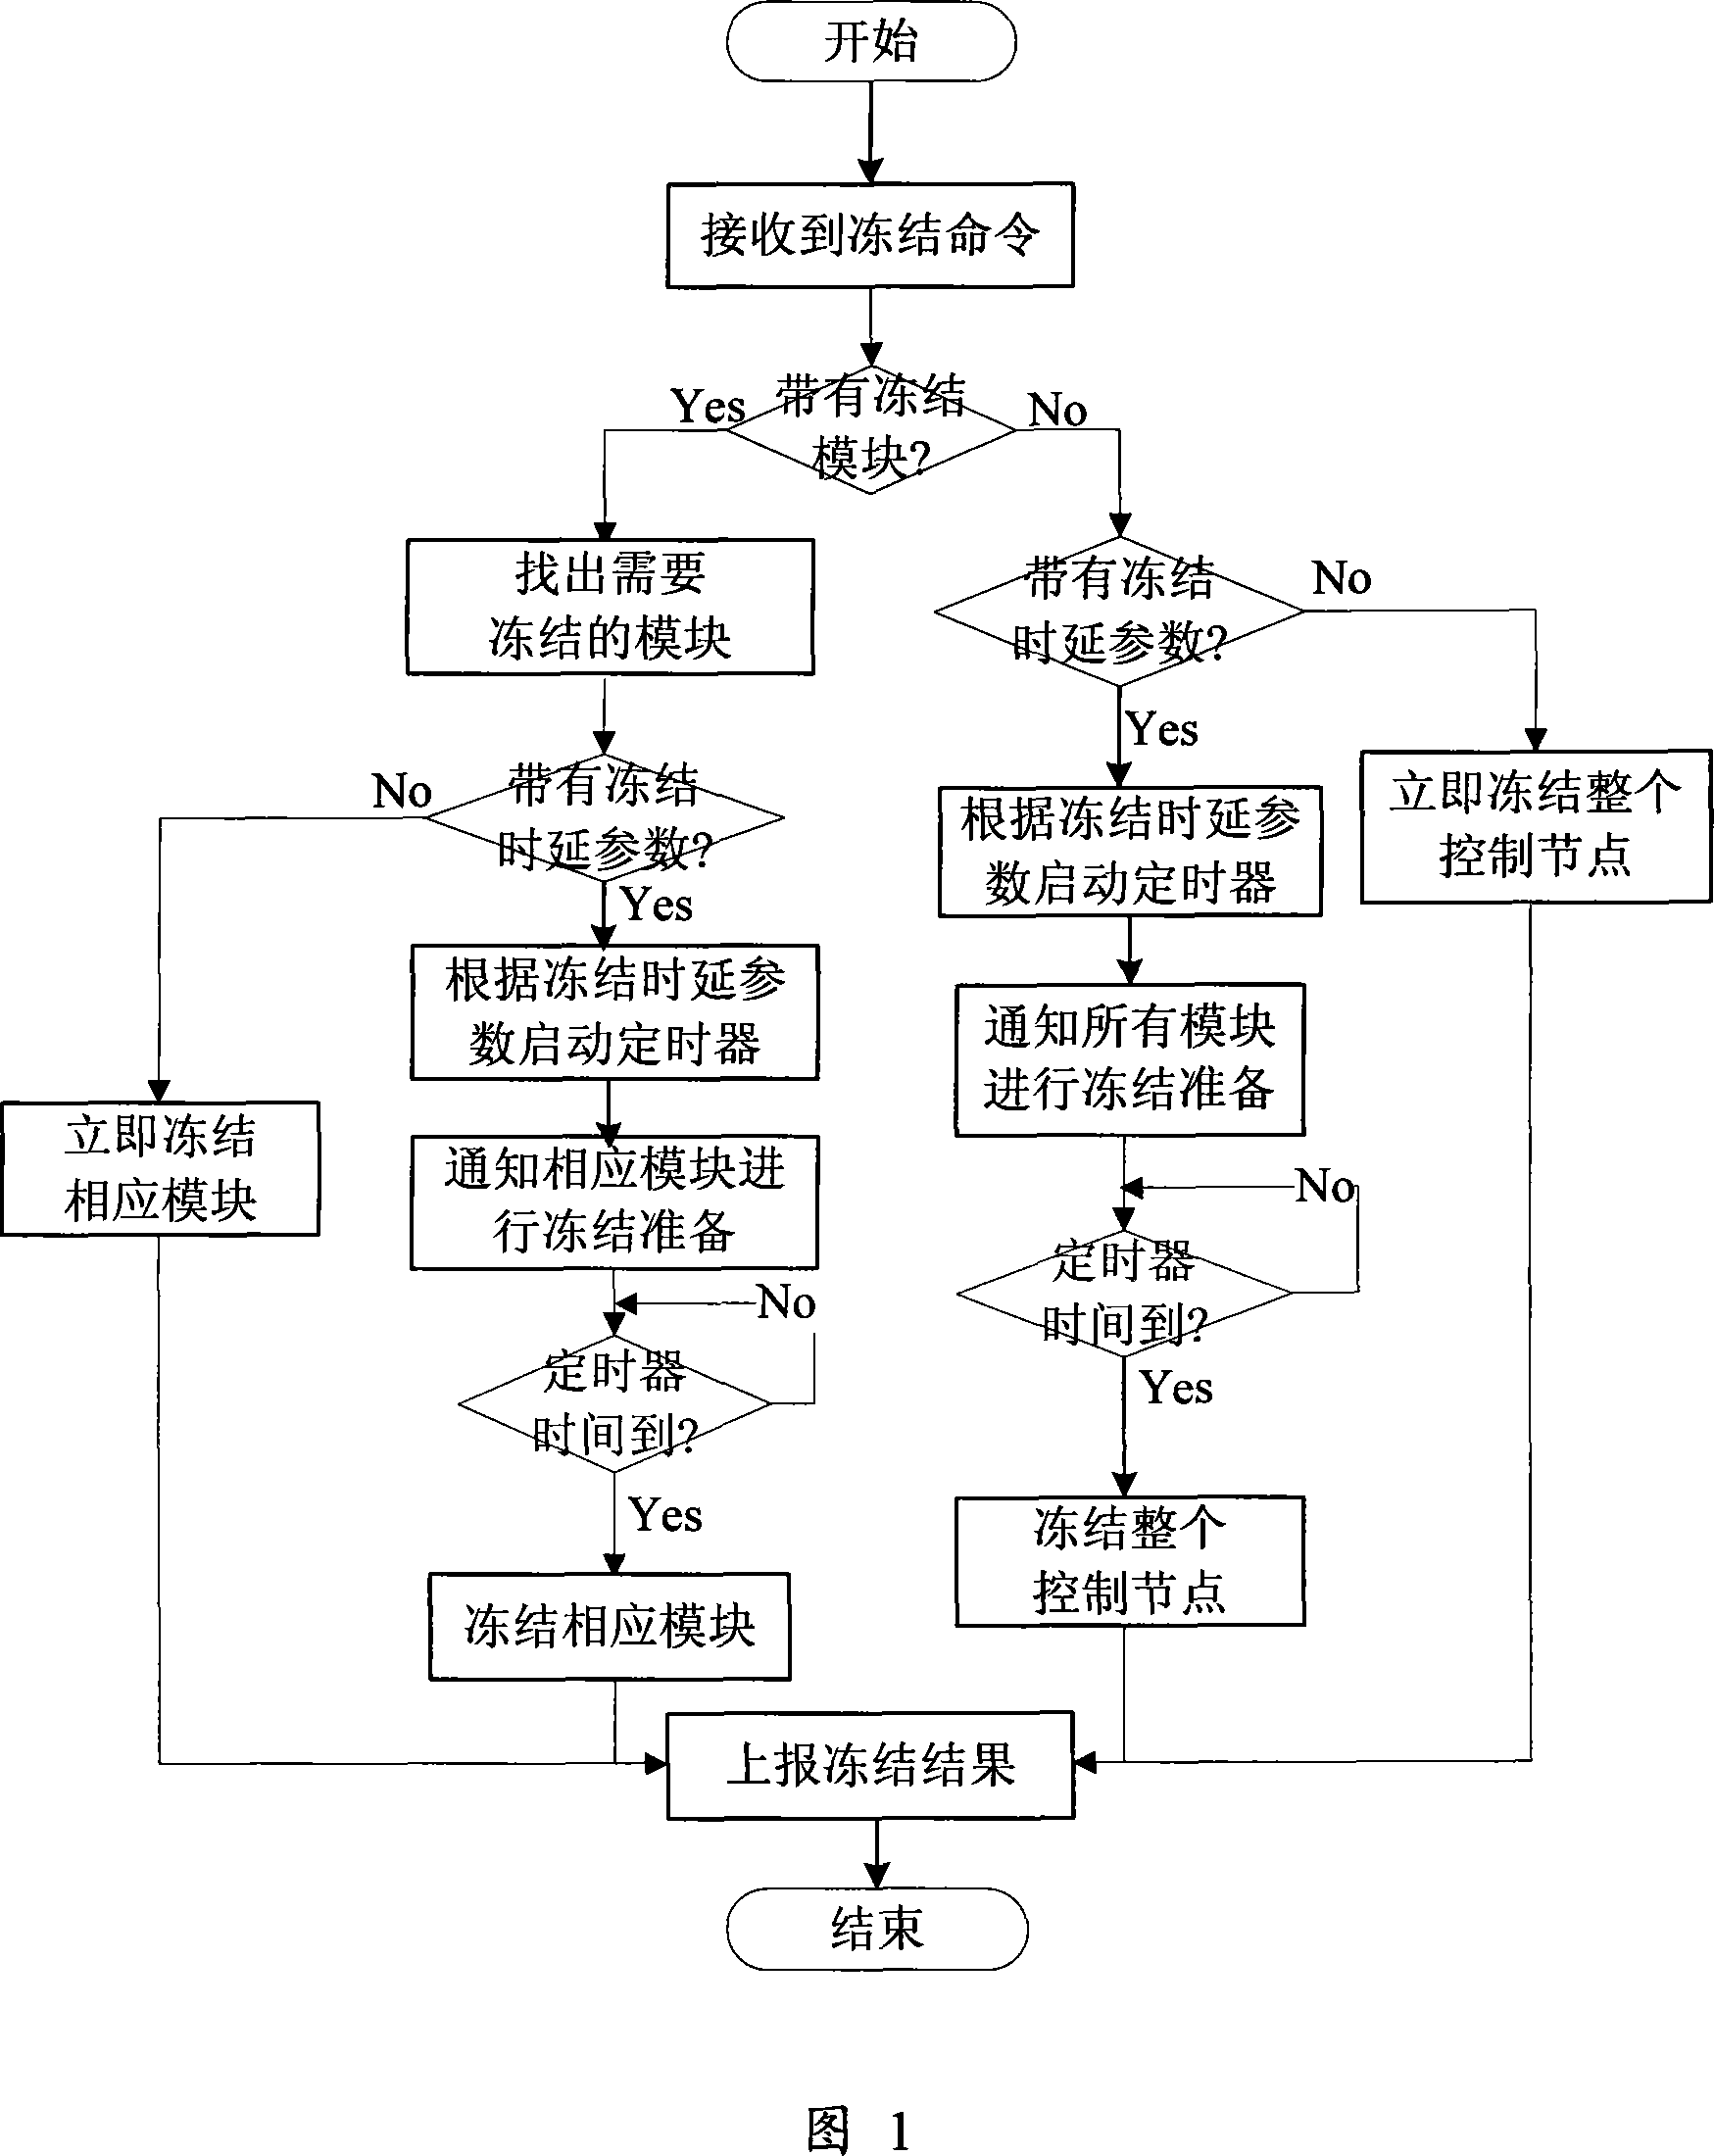 Function freezing/defreezing method in automatic switch optical network